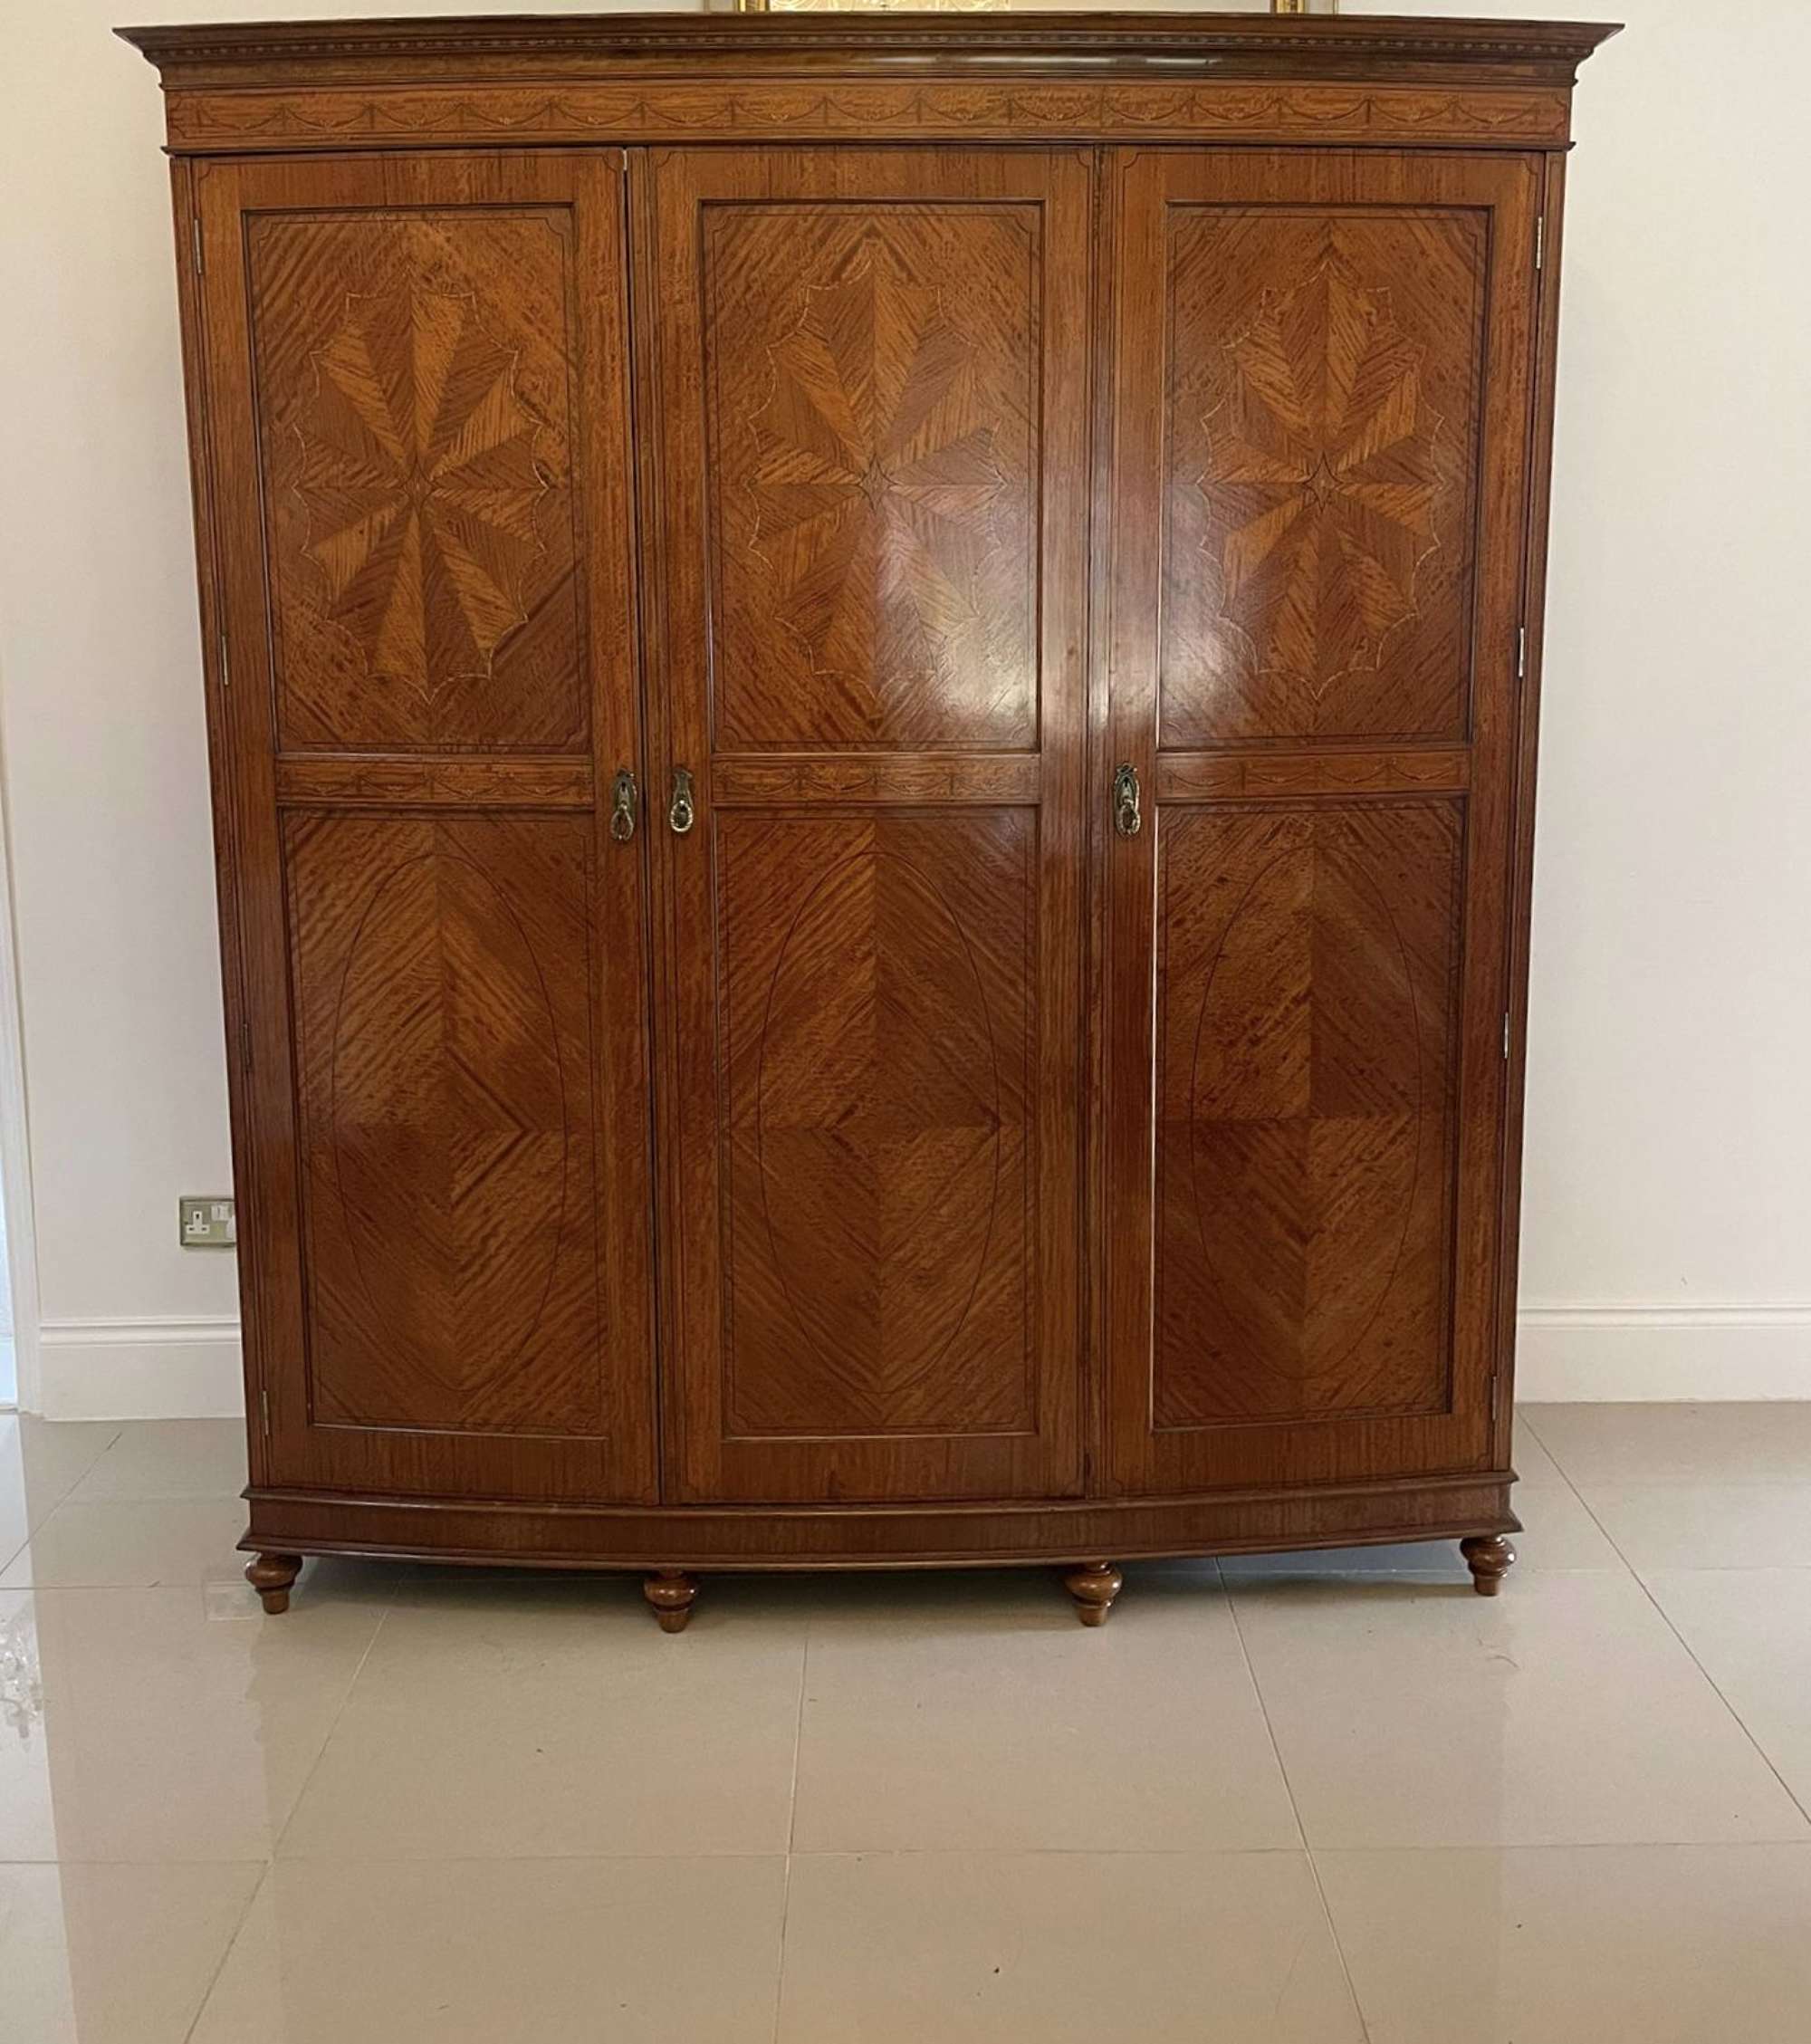 Outstanding Quality Antique Edwardian Satinwood Inlaid Bow Fronted Wardrobe